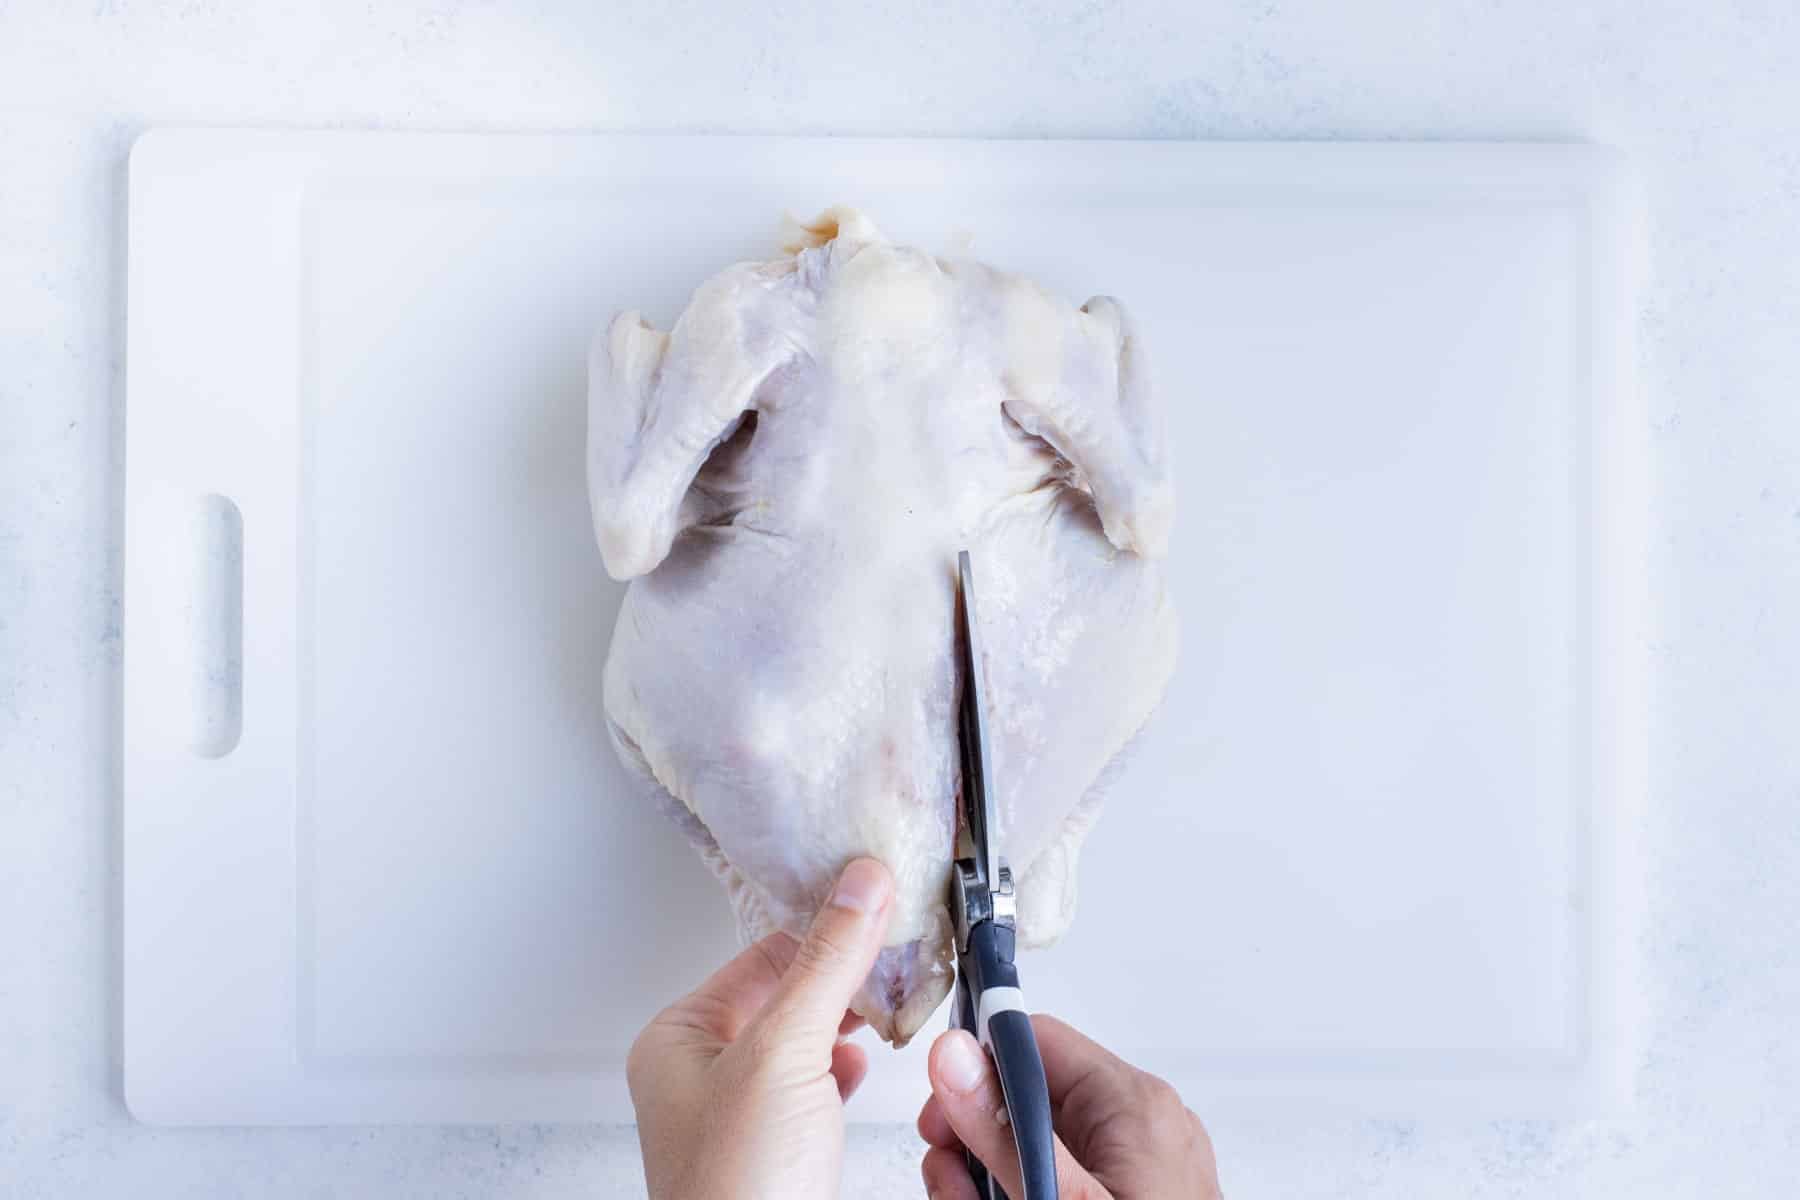 Scissors cut along the spine of a whole chicken.